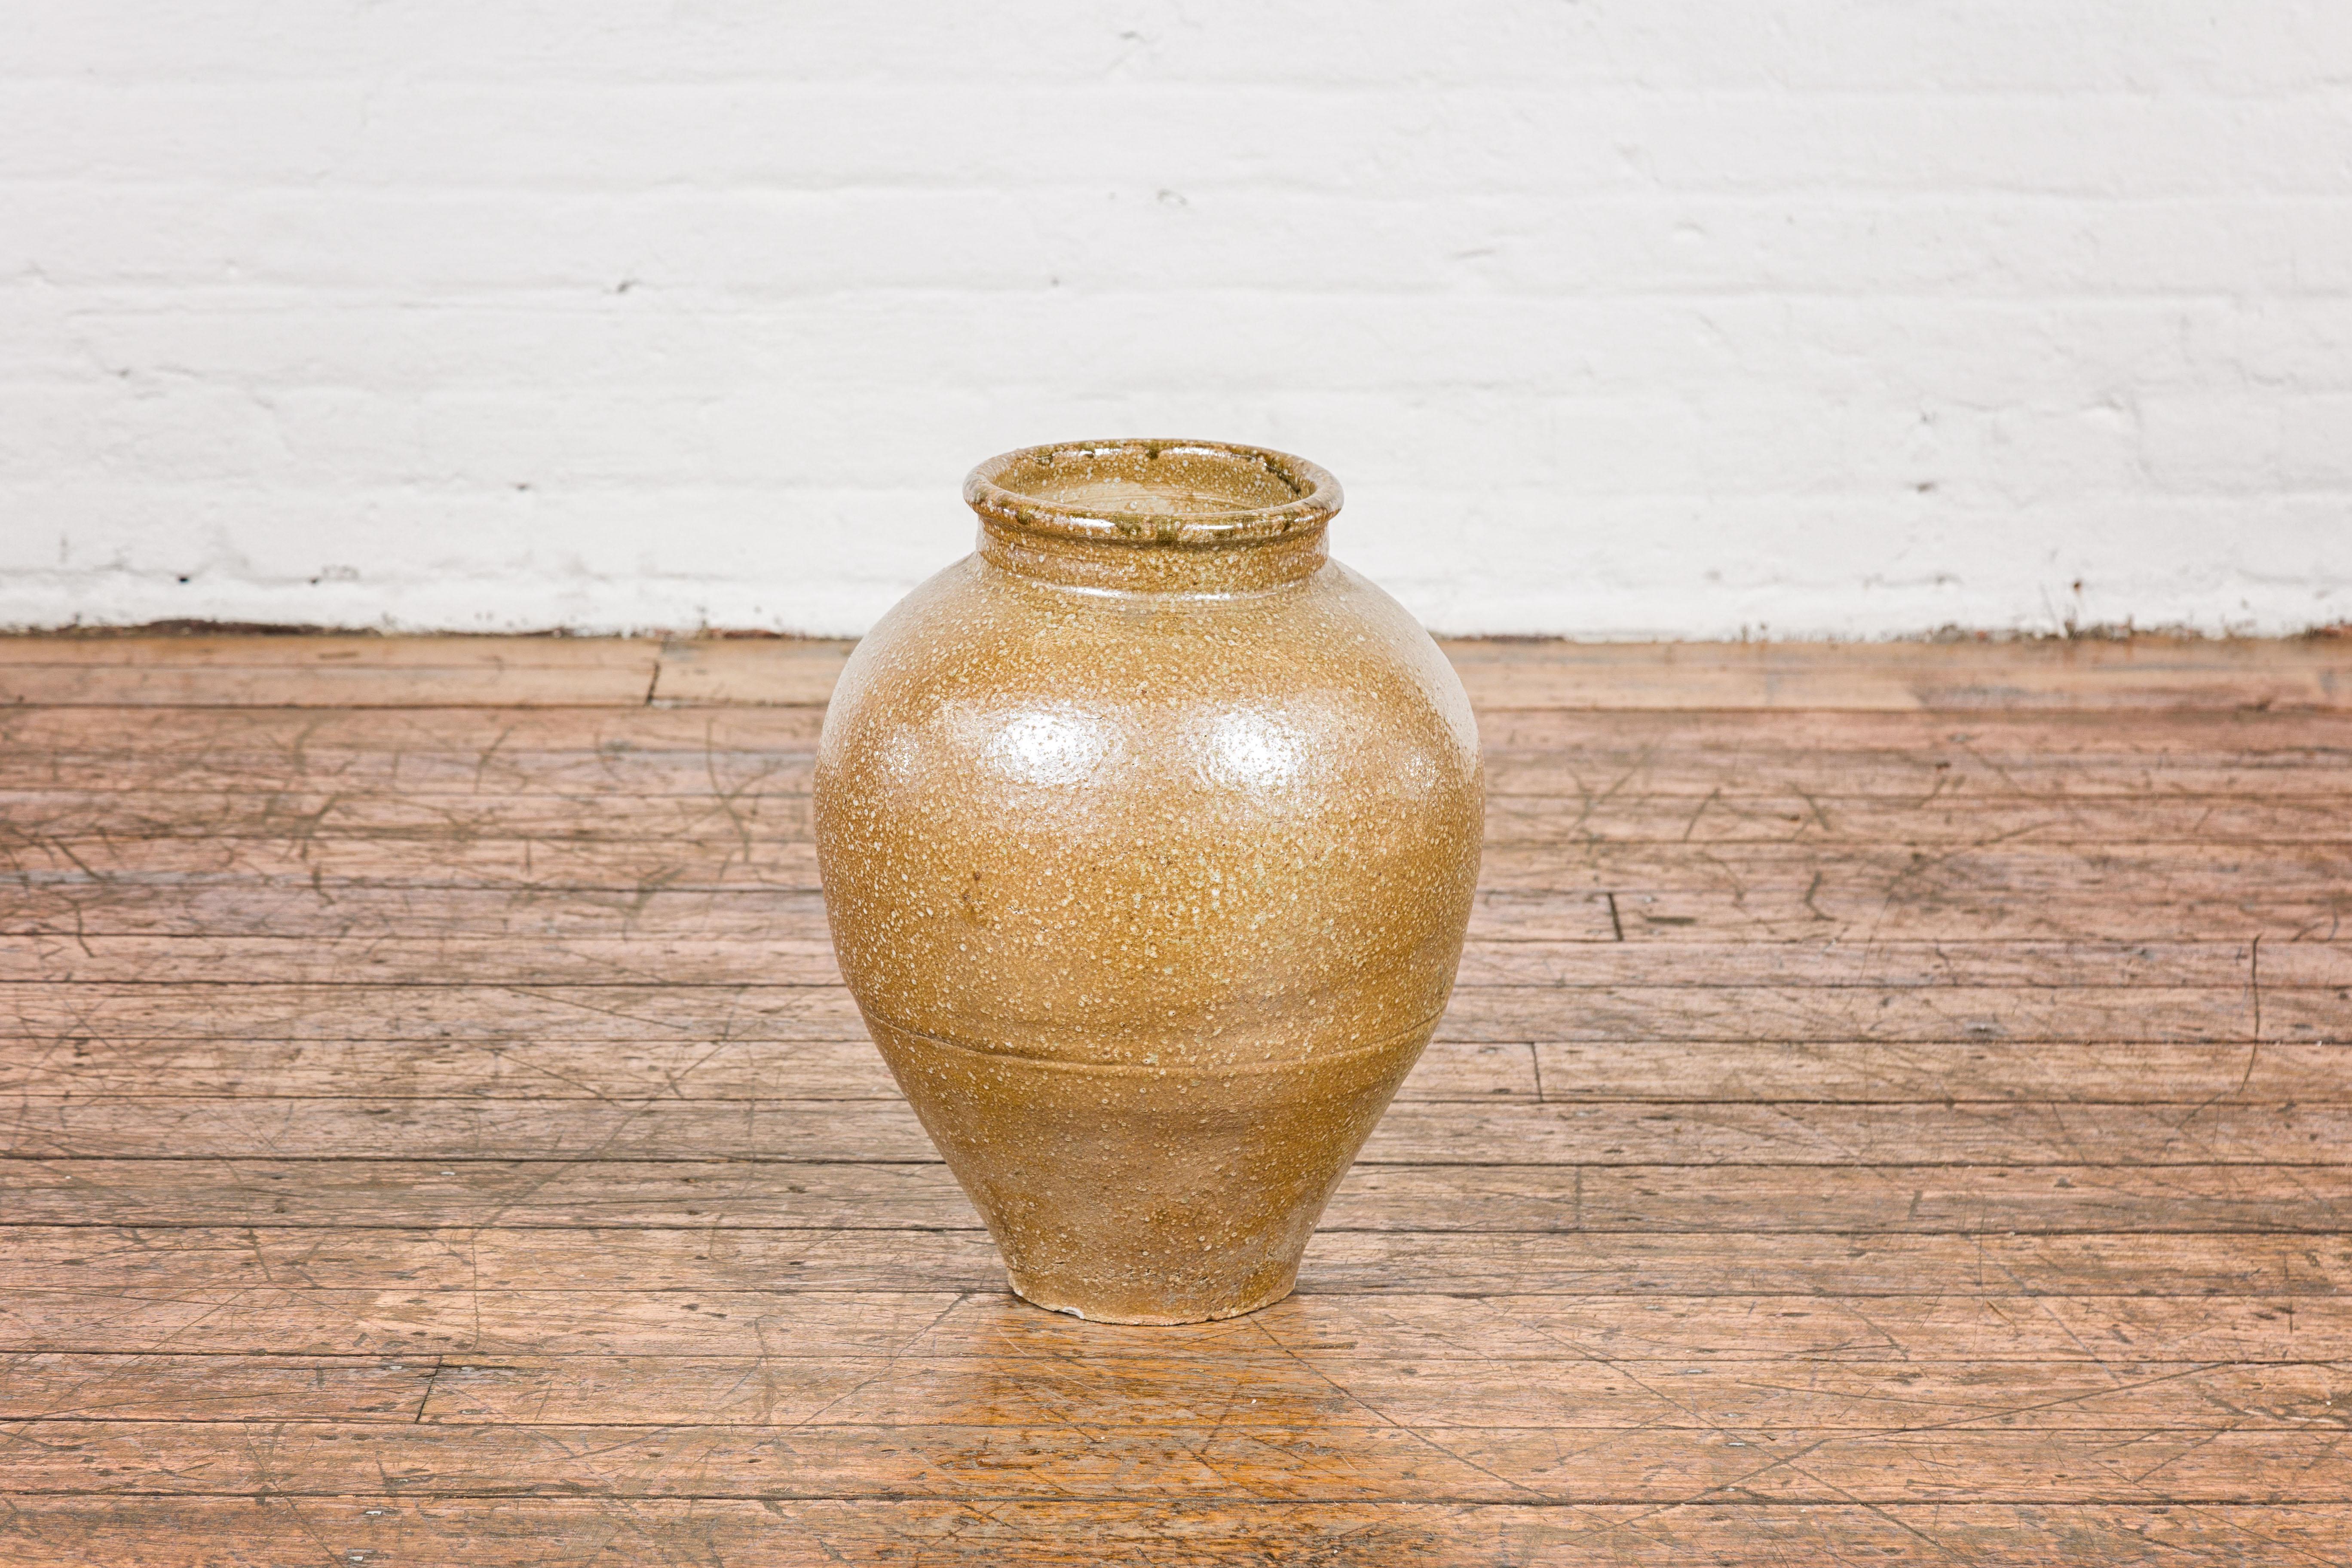 Japanese Taishō Period Two-Tone Sand Glaze Vase with Textured Finish, circa 1900 For Sale 3